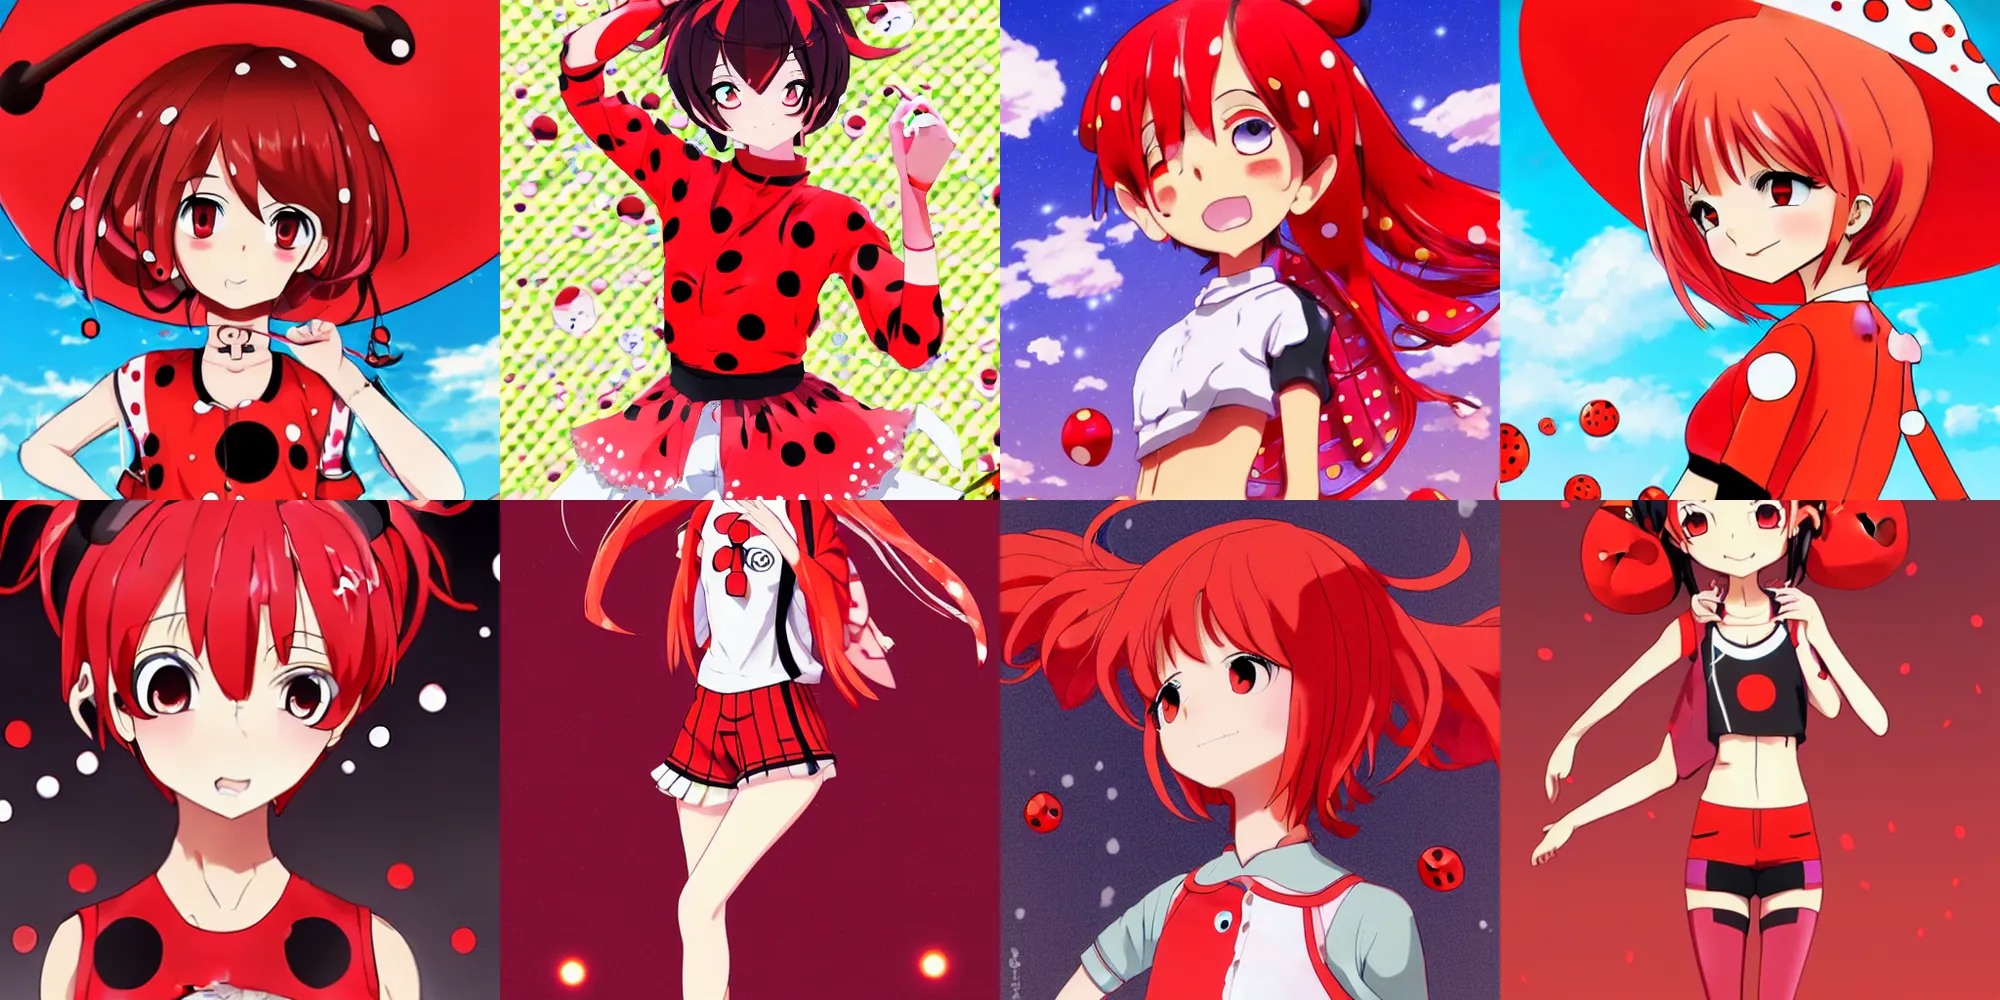 Prompt: anime key visual of a ladybug girl gijinka with red hair thick eyebrows and antennas wearing a red crop top with polkadots and a transparent vest by ilya kuvshinov